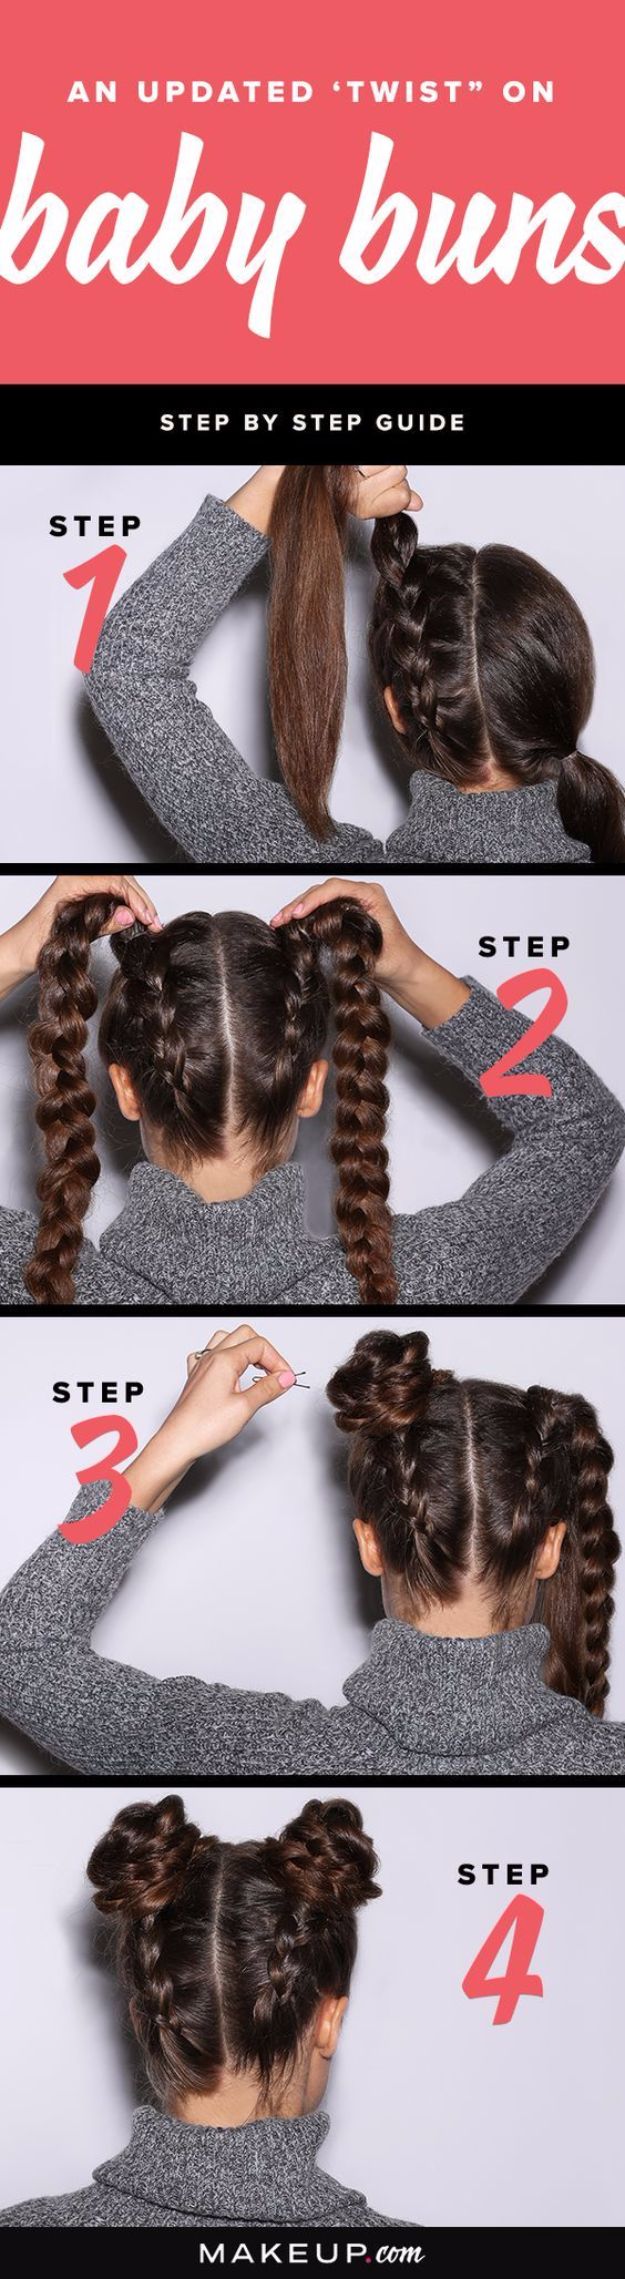 Easy Braids With Tutorials - Braided Baby Buns - Cute Braiding Tutorials for Teens, Girls and Women - Easy Step by Step Braid Ideas - Quick Hairstyles for School - Creative Braids for Teenagers - Tutorial and Instructions for Hair Braiding